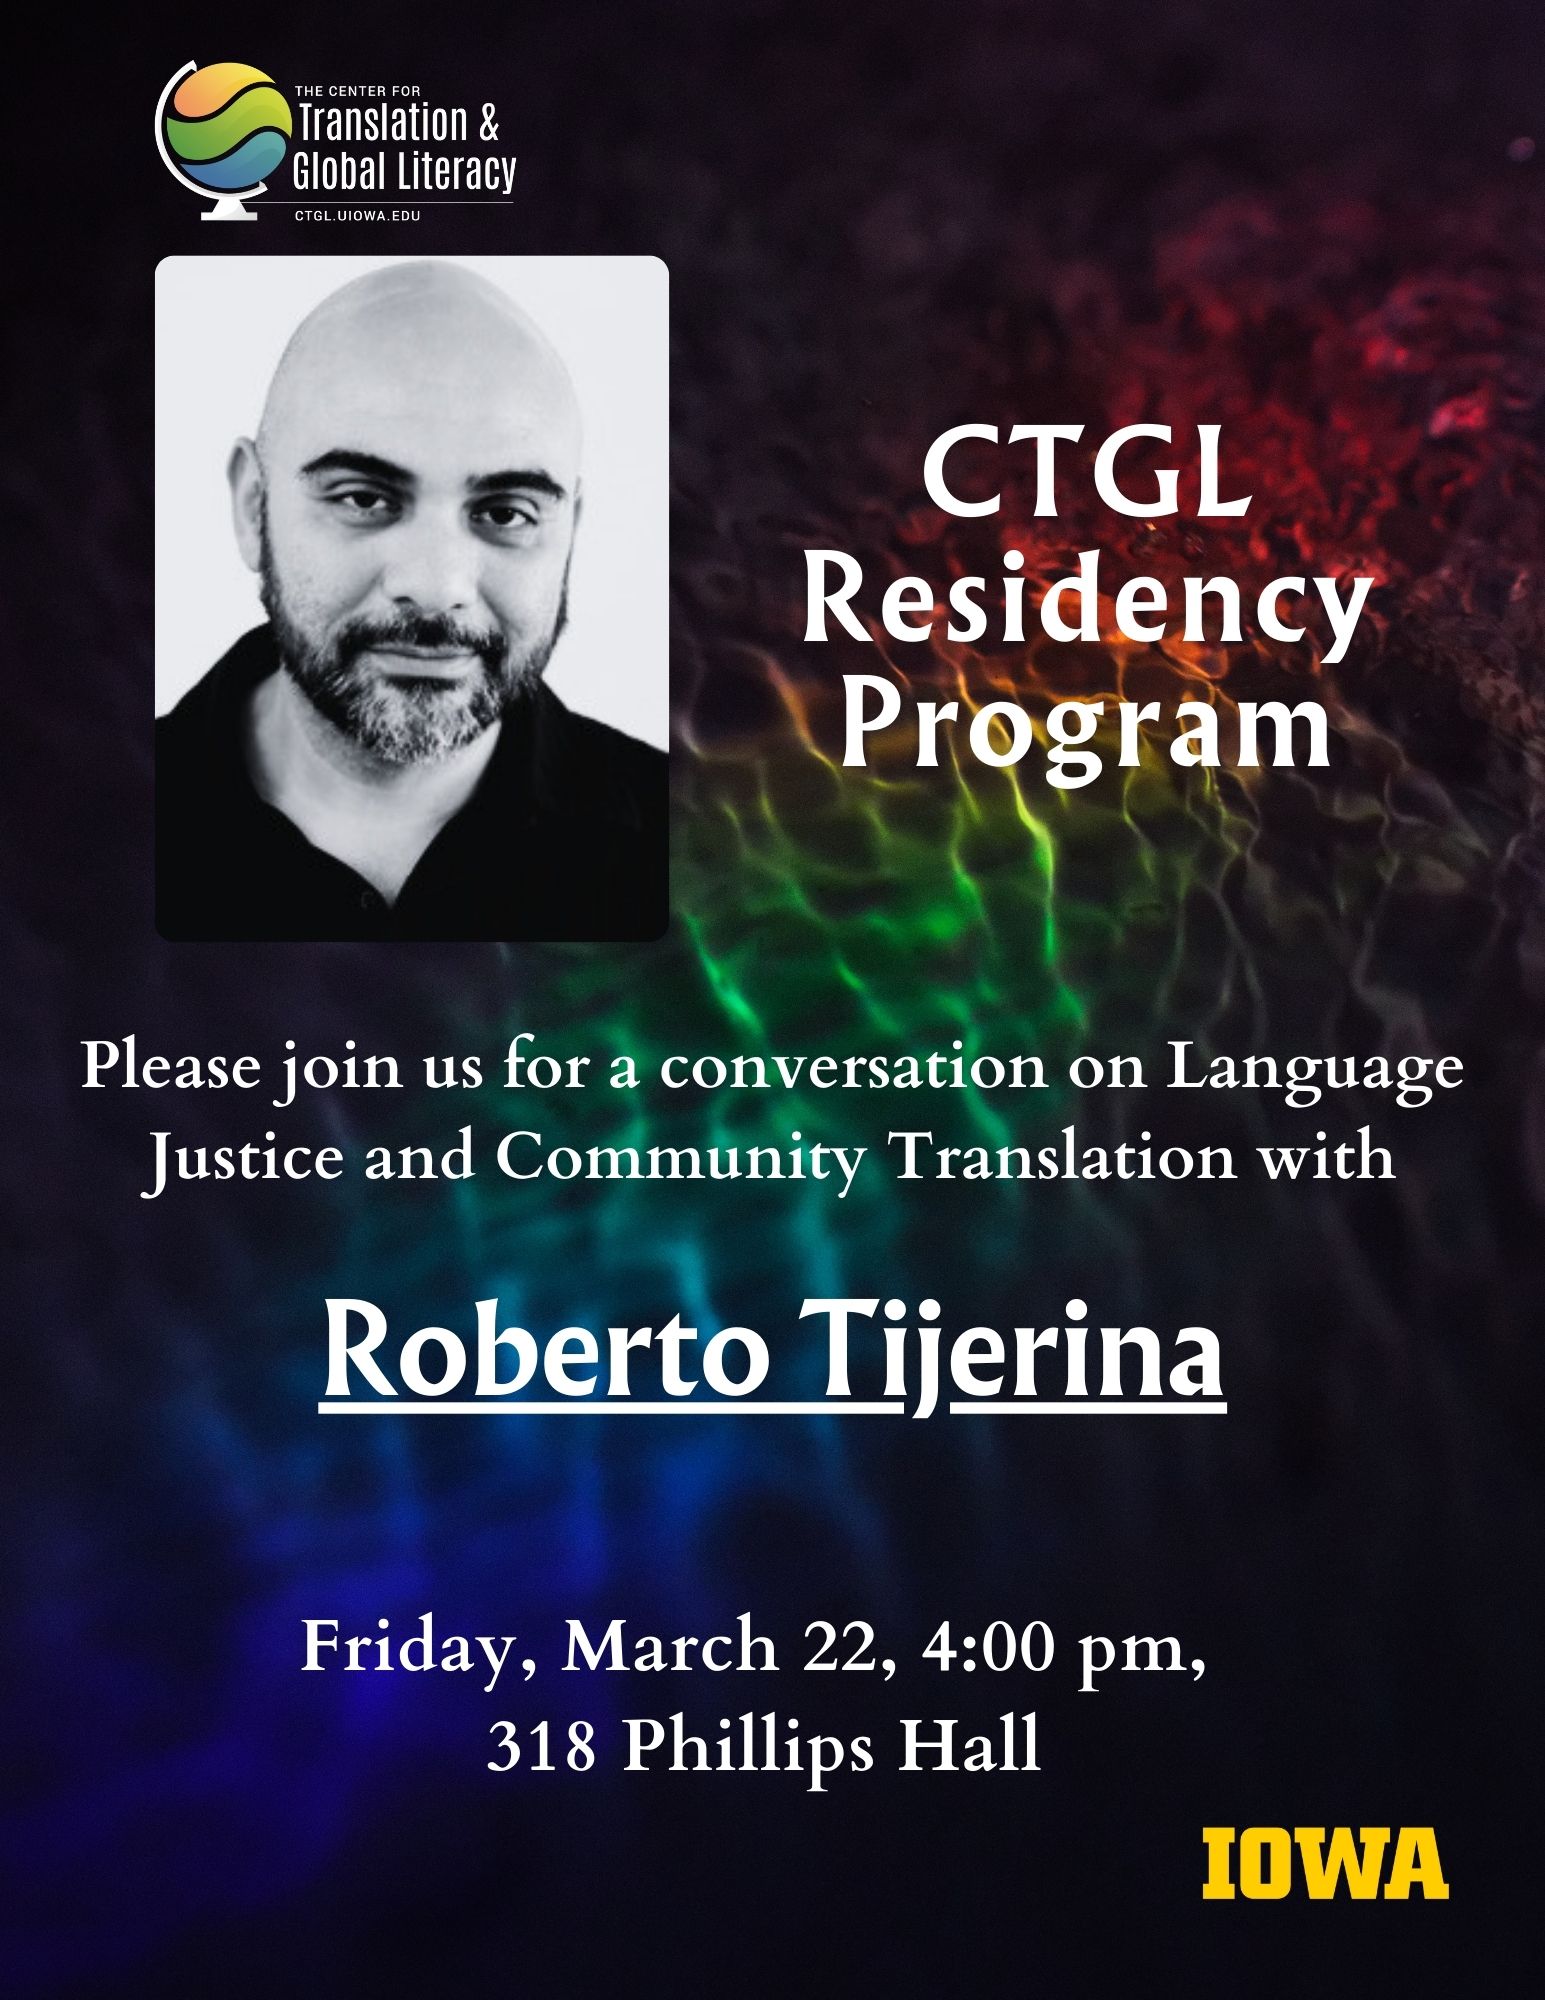 Please join us for a conversation on Language Justice and Community Translation with Roberto Tijerina